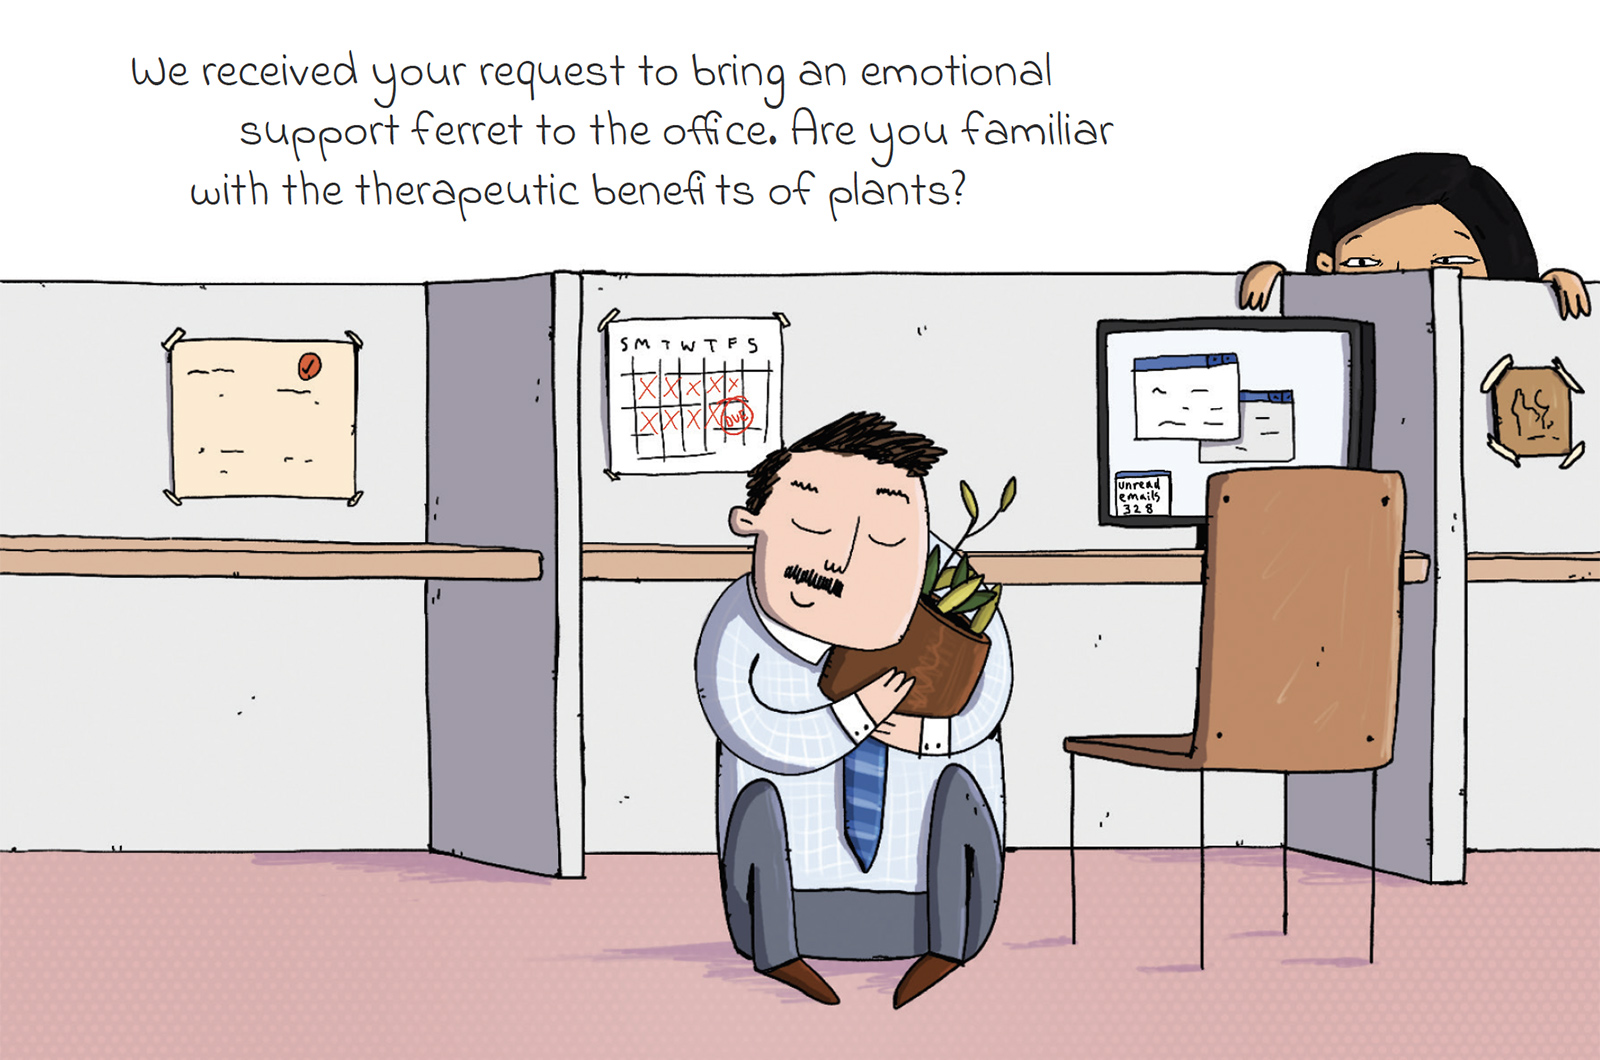 Man hugging a plant, with advice that plants can provide emotional support (rather than a ferret).